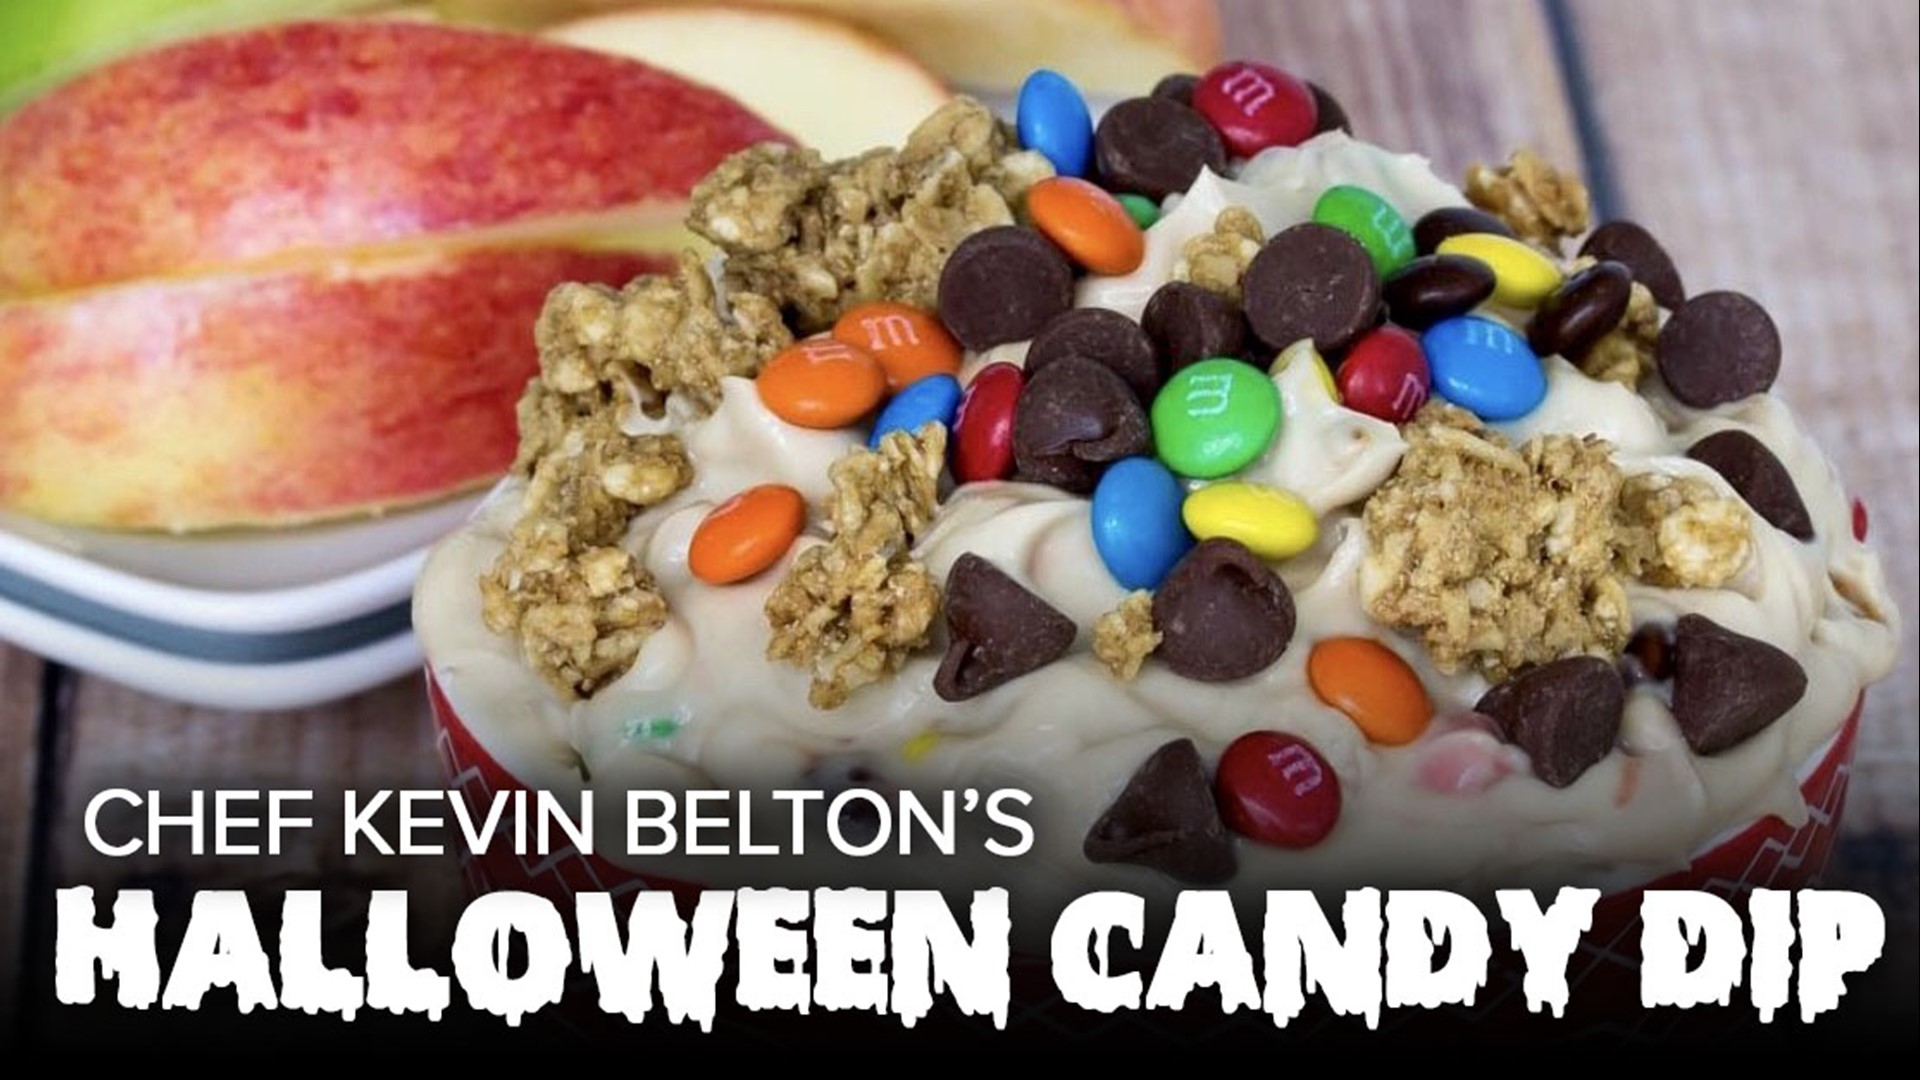 Here's a little something special you can do with some of the Halloween candy your kids get tomorrow!